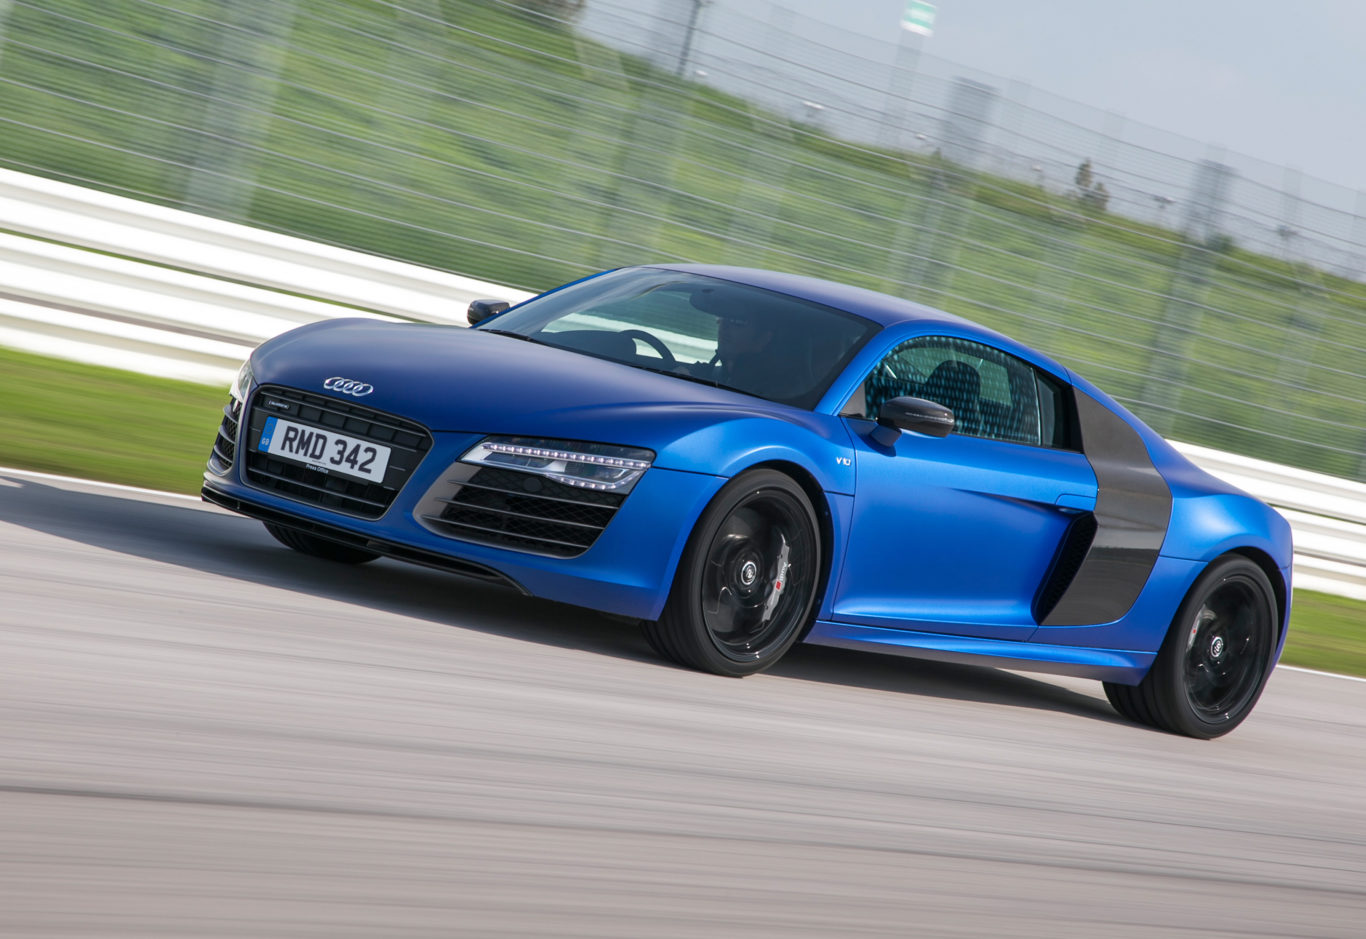 The first-generation R8 was one of the first 'everyday' supercars